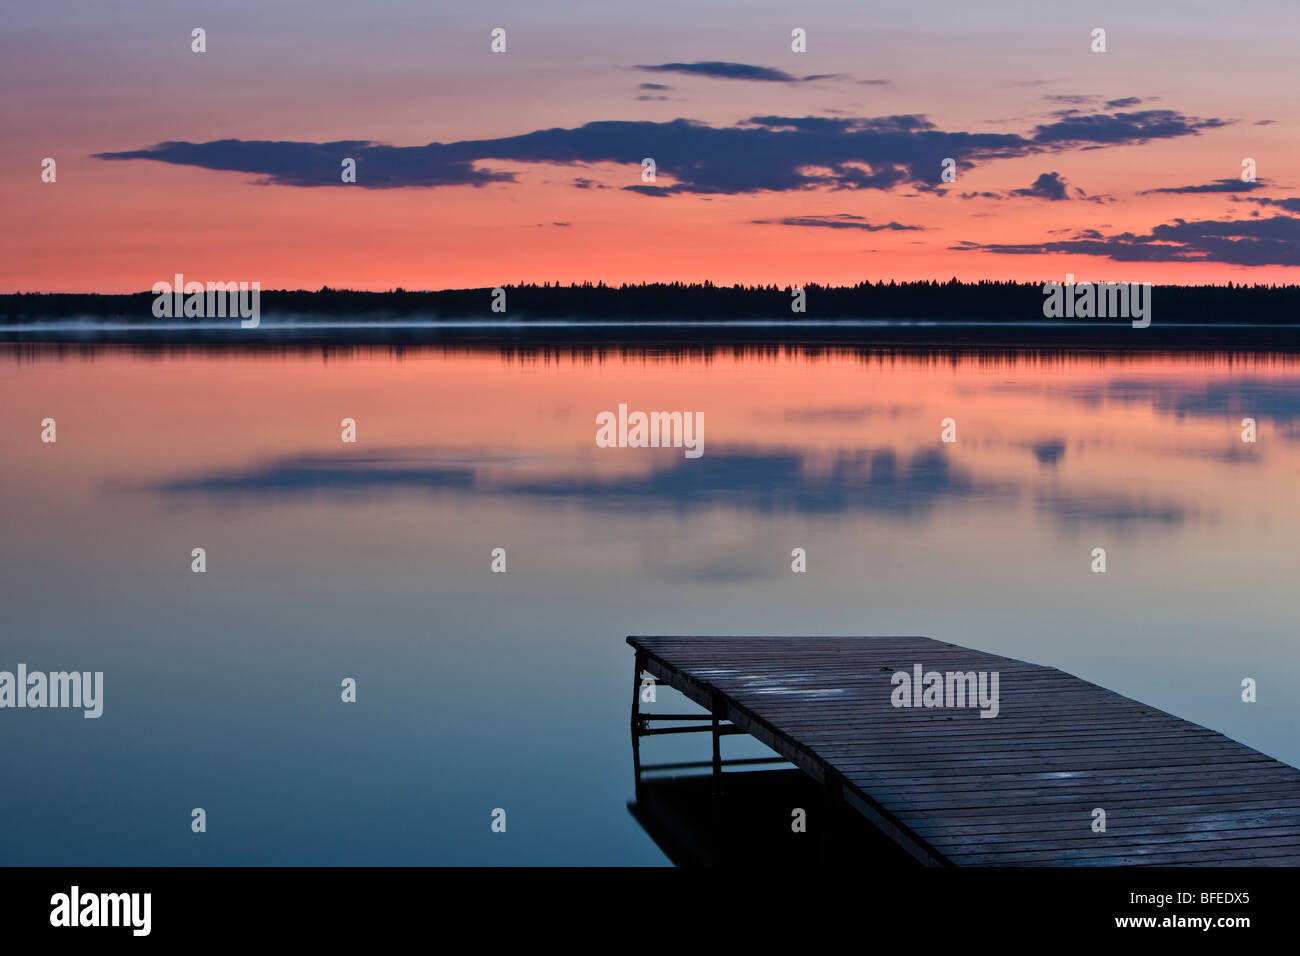 Sunset over a wooden wharf on Lake Audy, Riding Mountain National Park, Manitoba, Canada Stock Photo